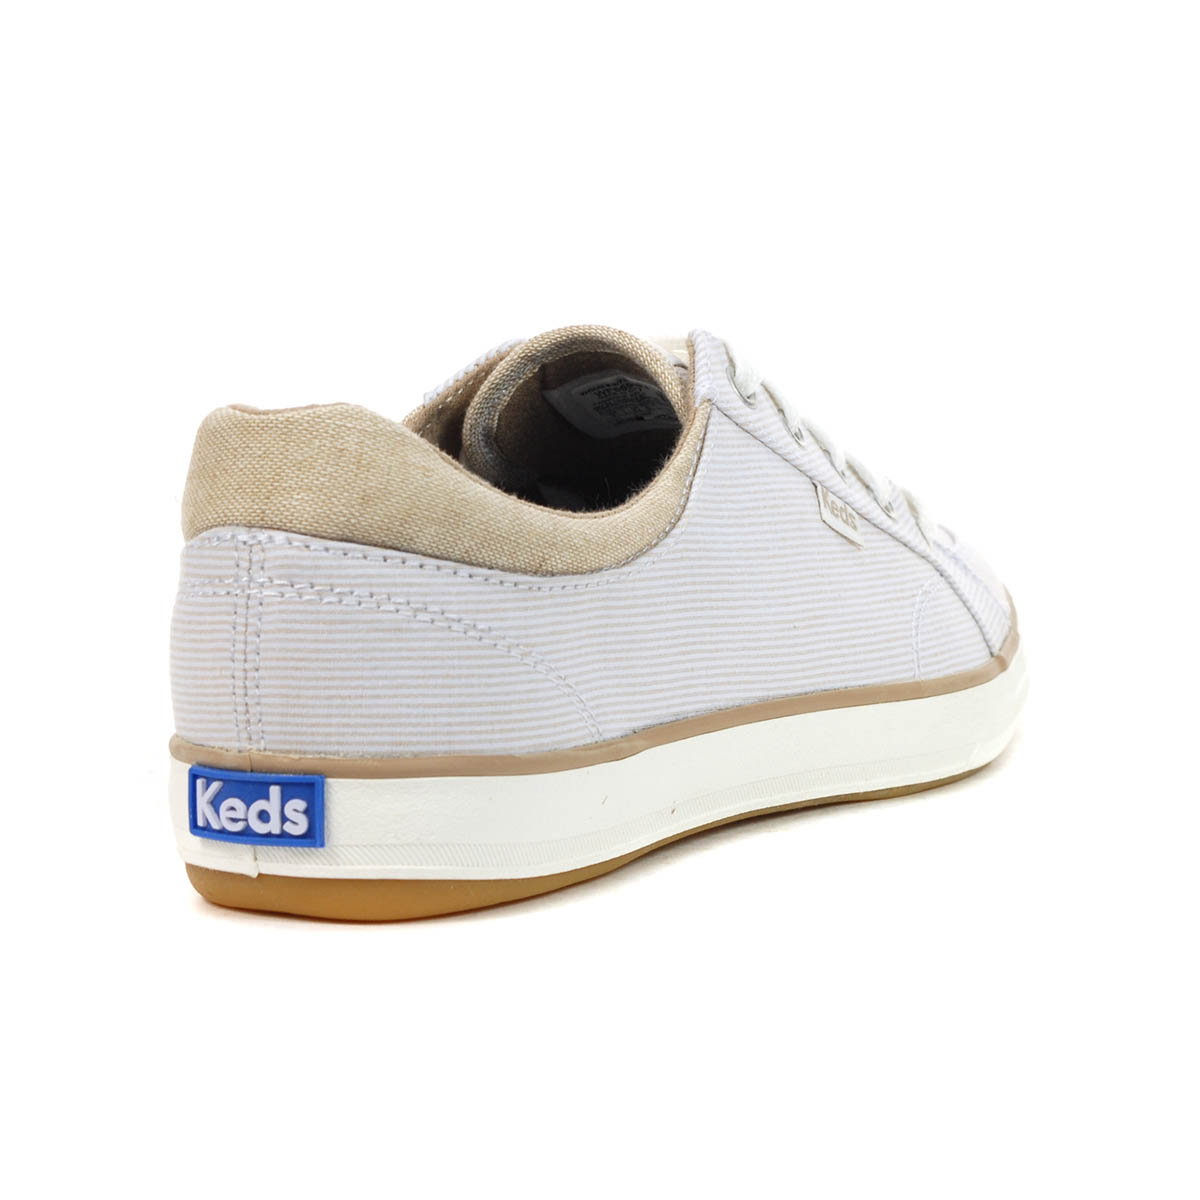 Keds Center II Beige Chambray Striped Sneakers WF65937 